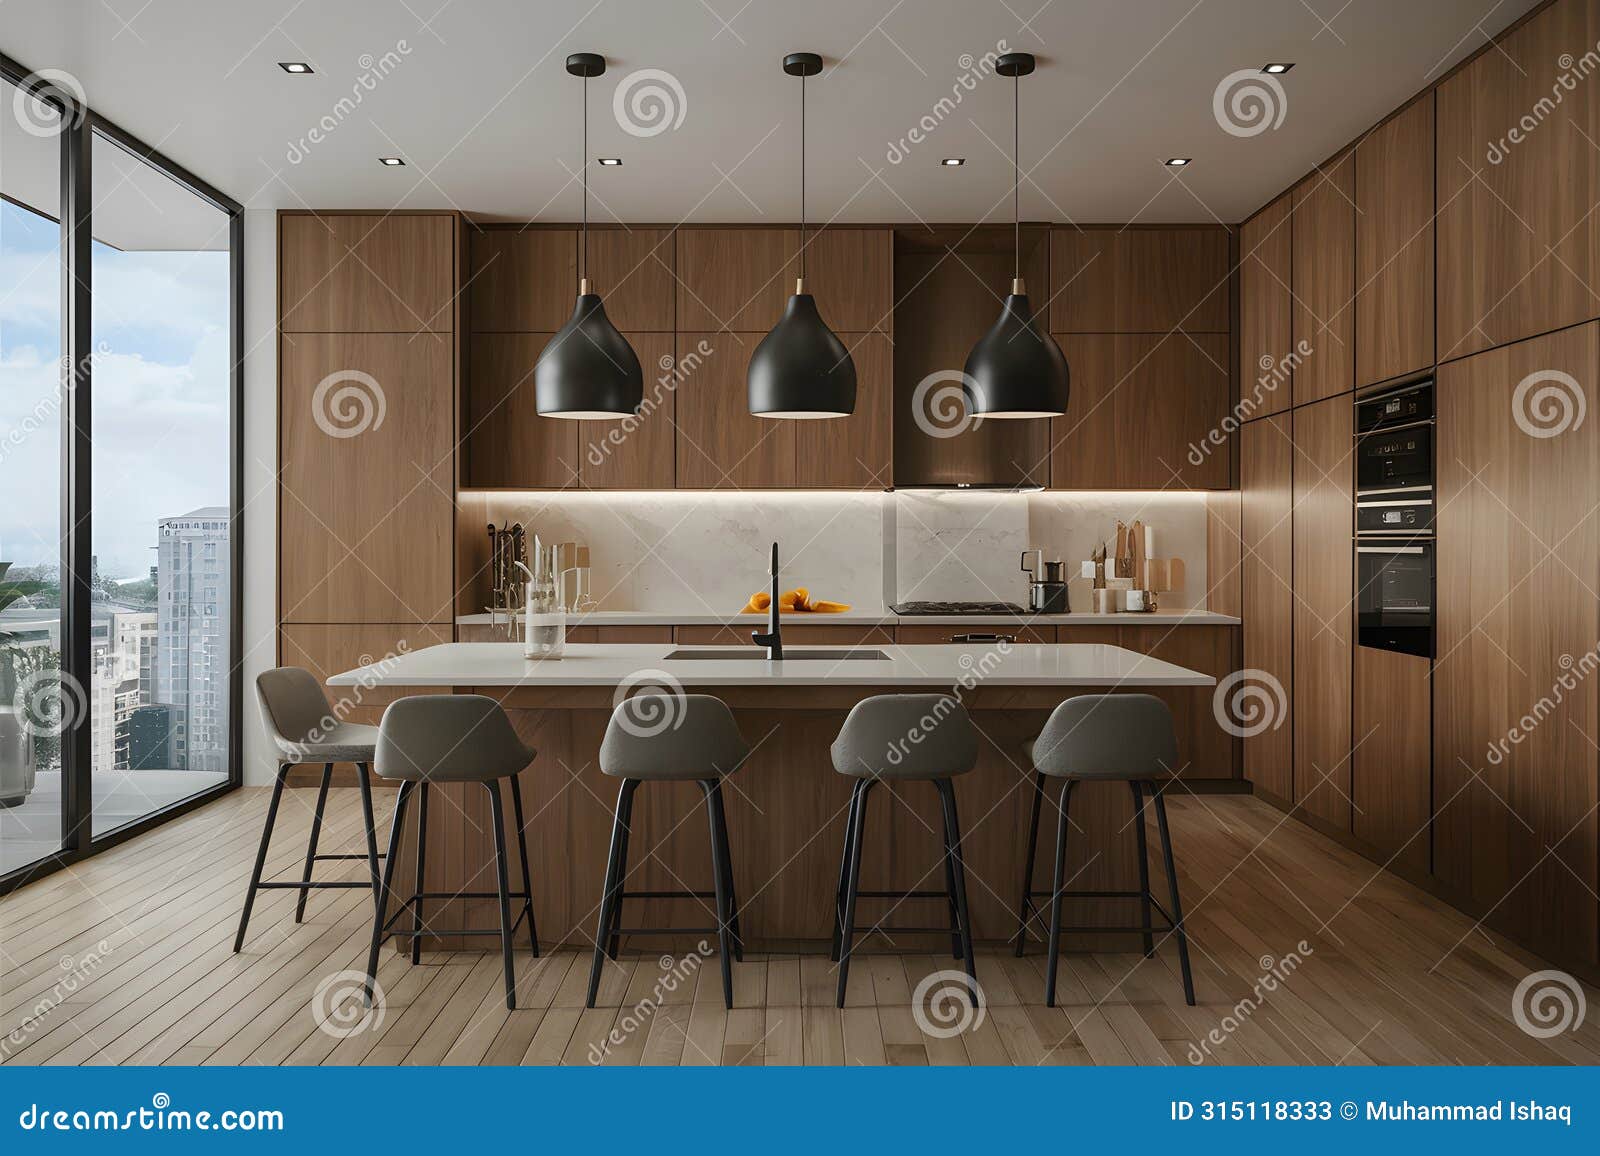 stockphoto a modern depiction of a 3d kitchen in  photography